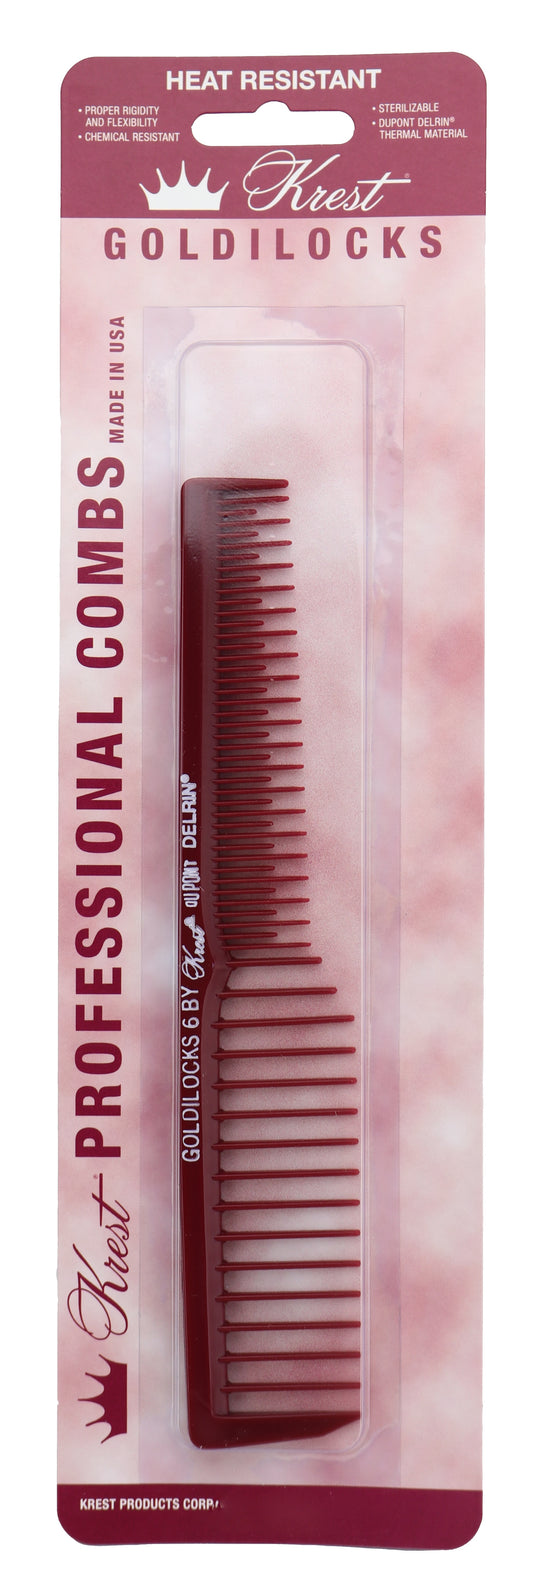 Krest Goldilocks G6 7 In Heat Resistant Space Tooth Hair Comb. For Volume Wigs & Natural Hair. 1 pc.